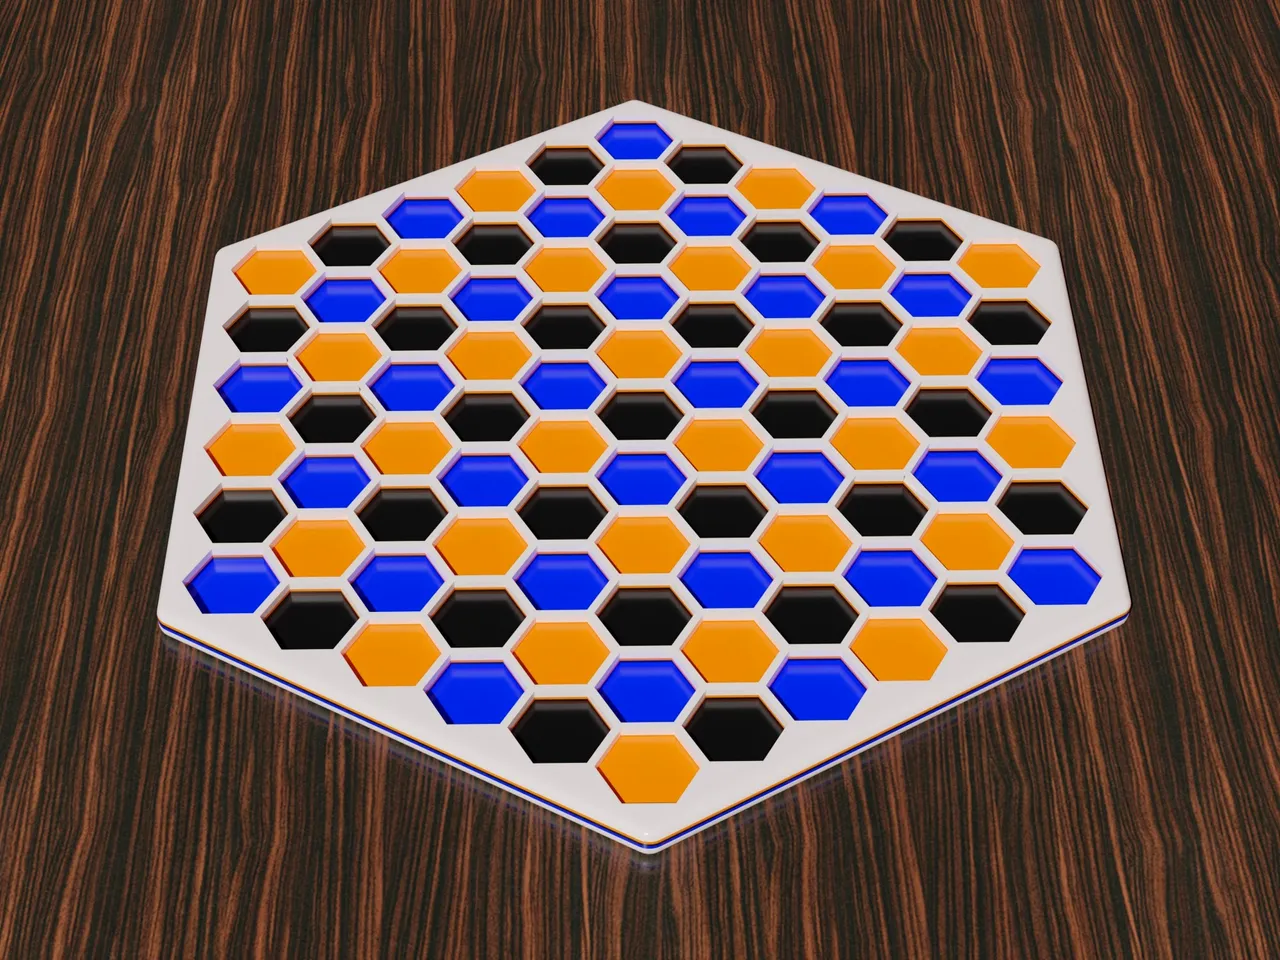 File:Chess tile pl.png - Wikipedia